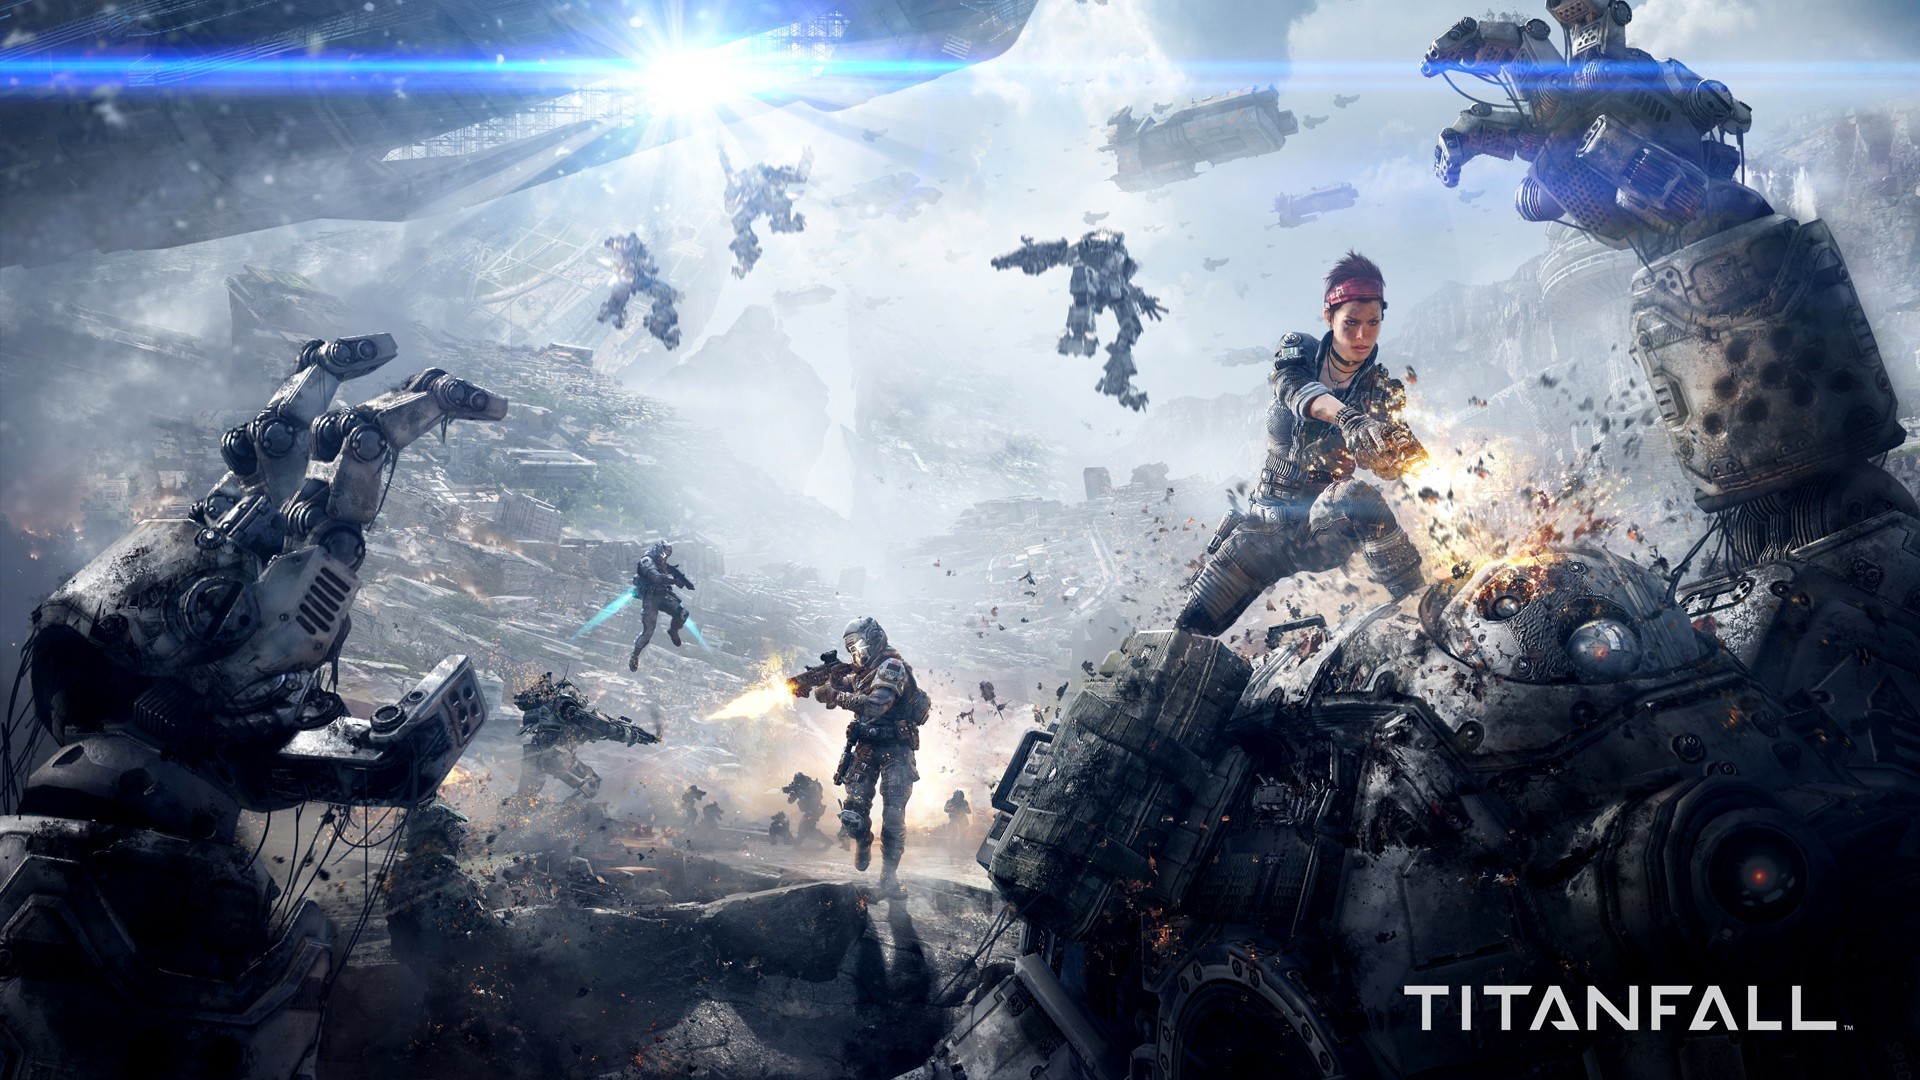 General 1920x1080 Titanfall video games PC gaming video game art science fiction Respawn Entertainment